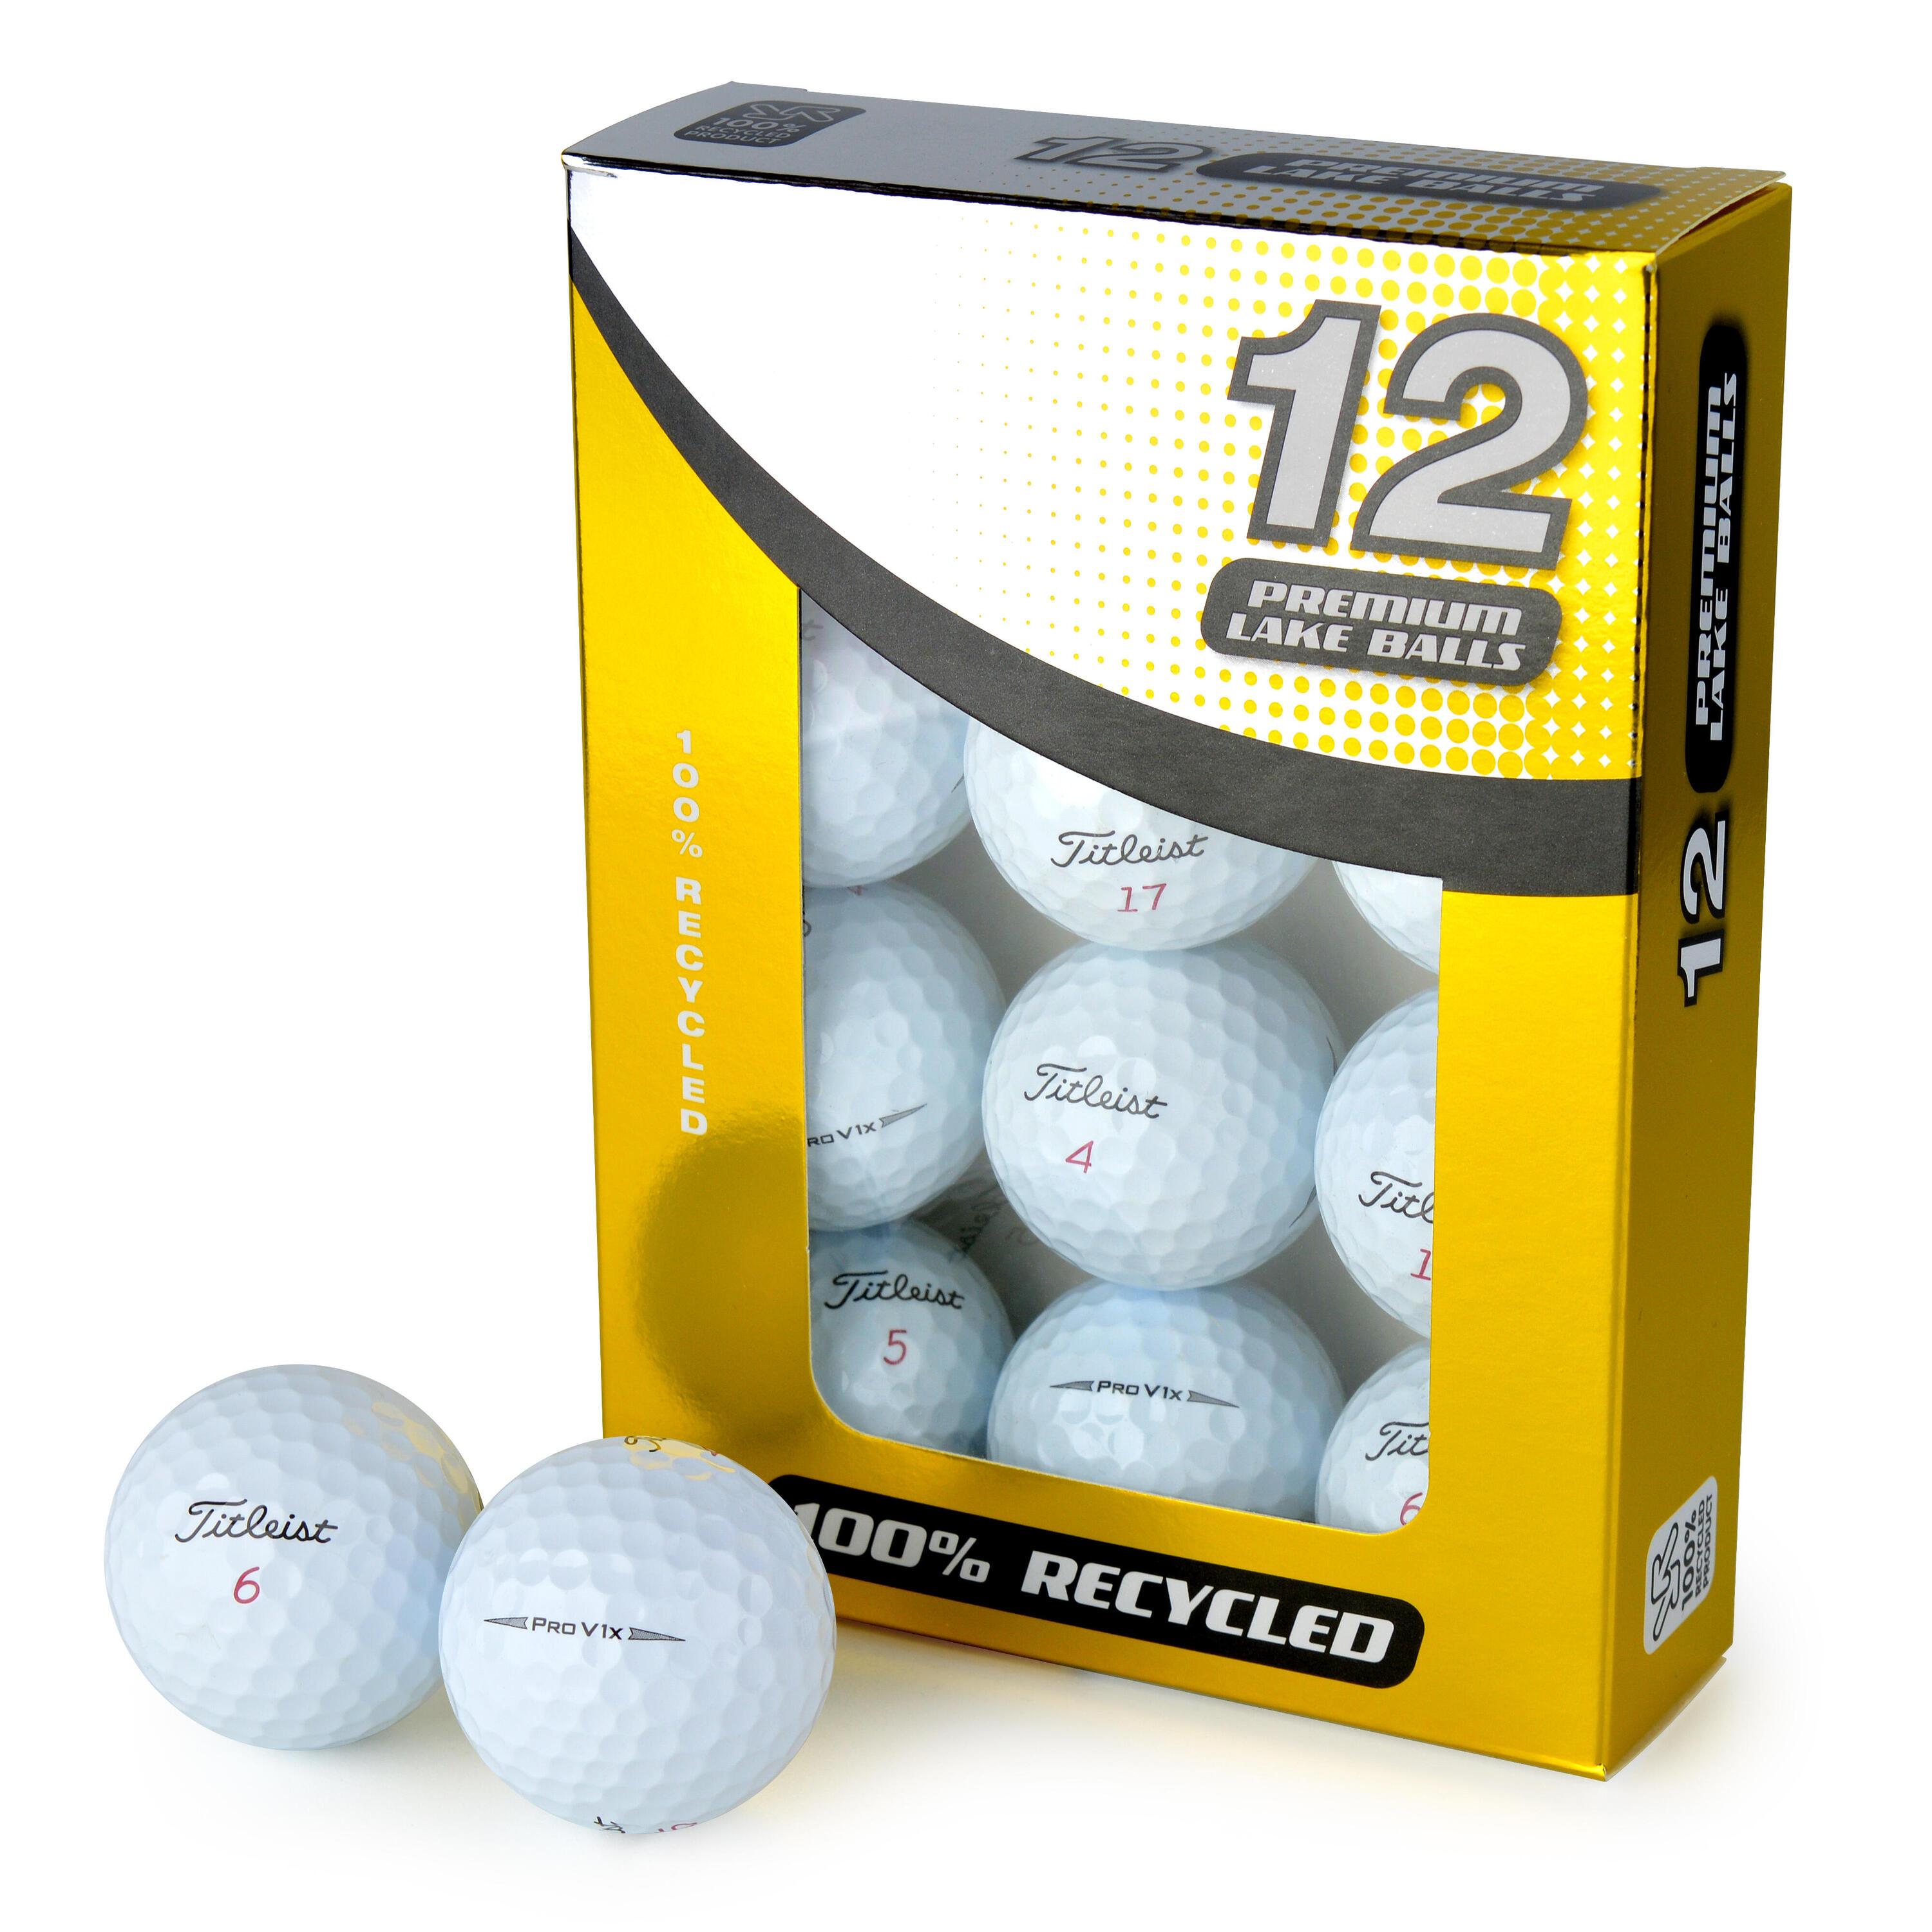 SECOND CHANCE Second Chance Titleist Pro V1x Grade A Lake Golf Balls - White, Pack of 12